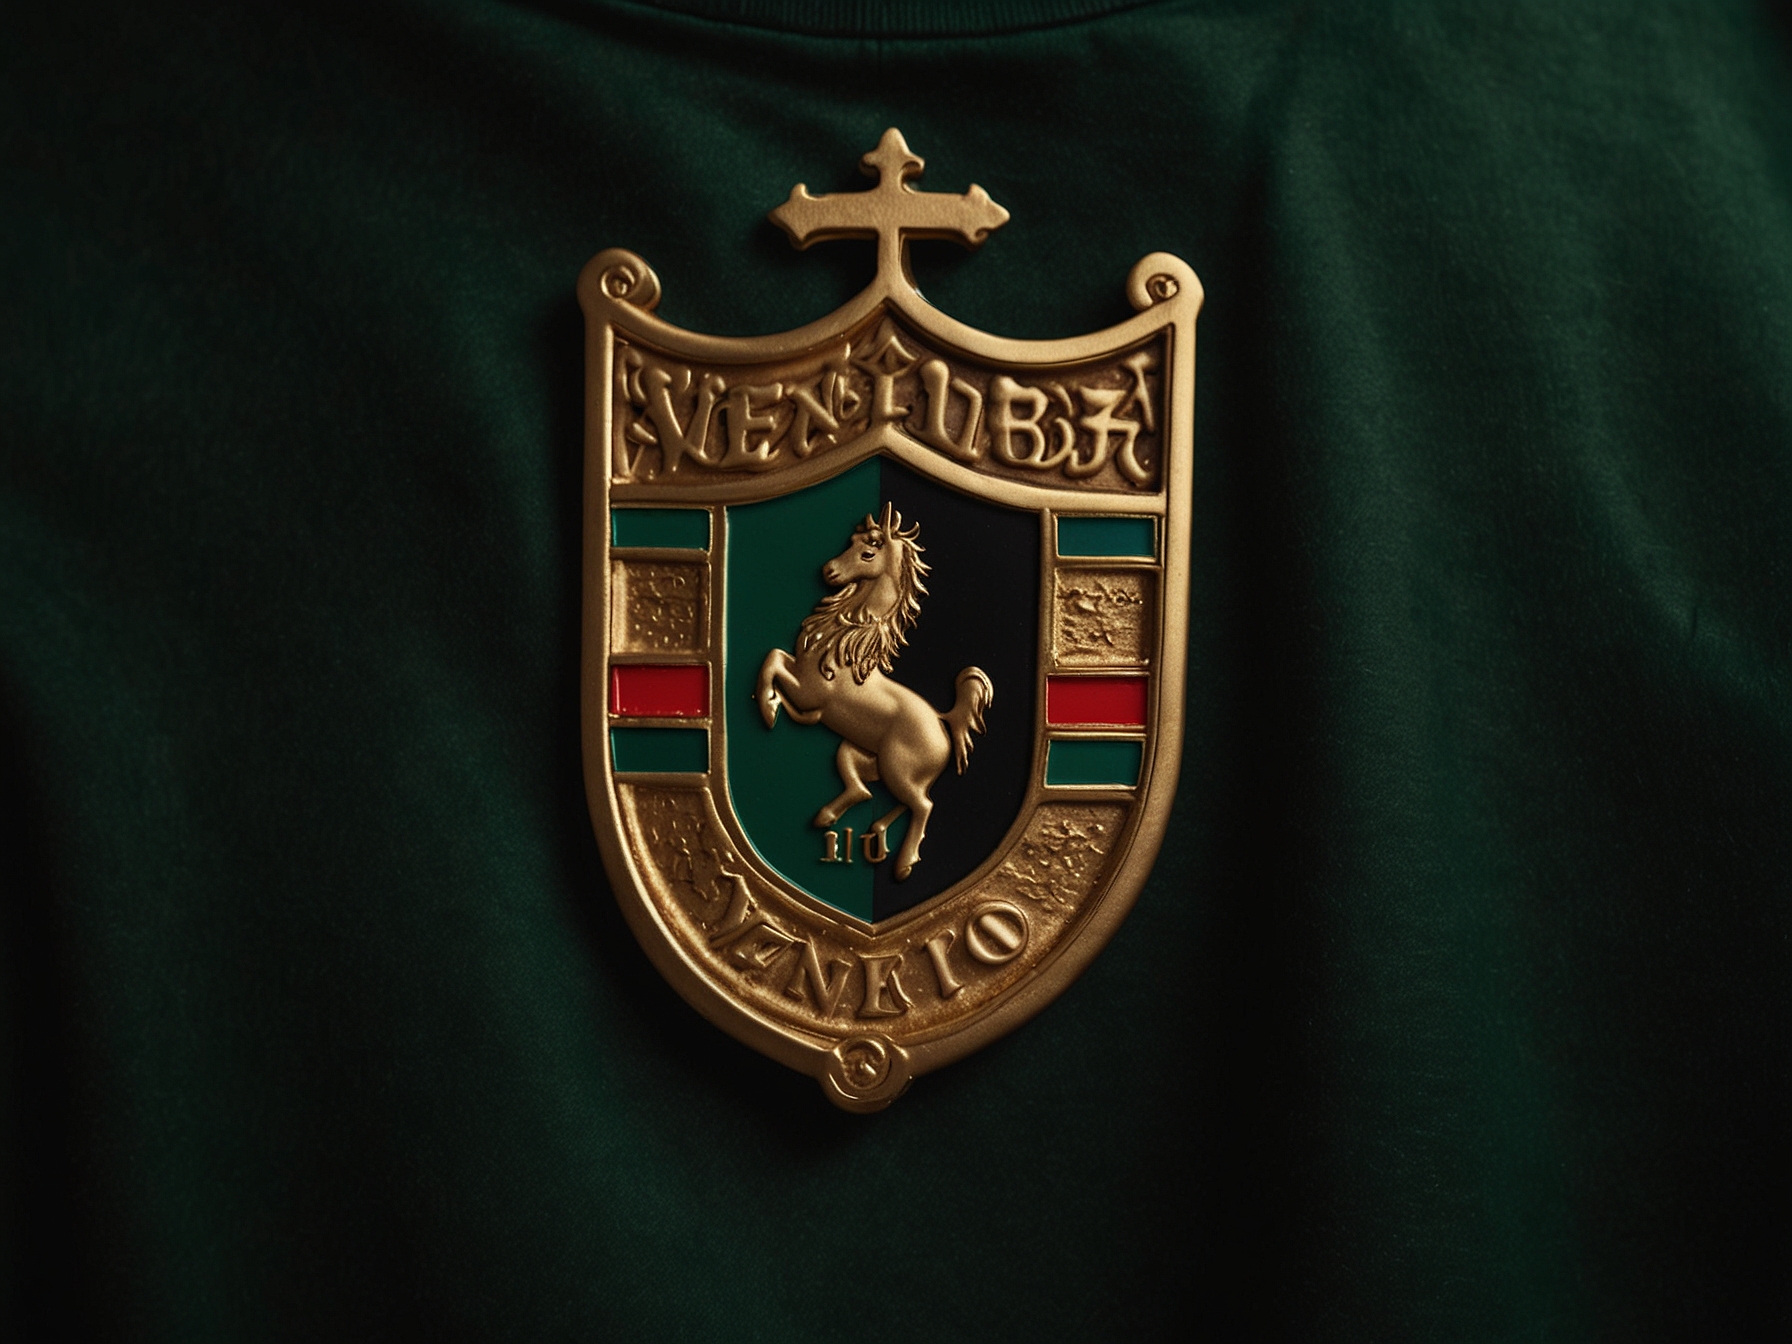 A detailed close-up of the Venezia shirt from Pantofola D'Oro's new collection, showcasing the intricate gold accents and vintage badge set against the classic black and green colors.